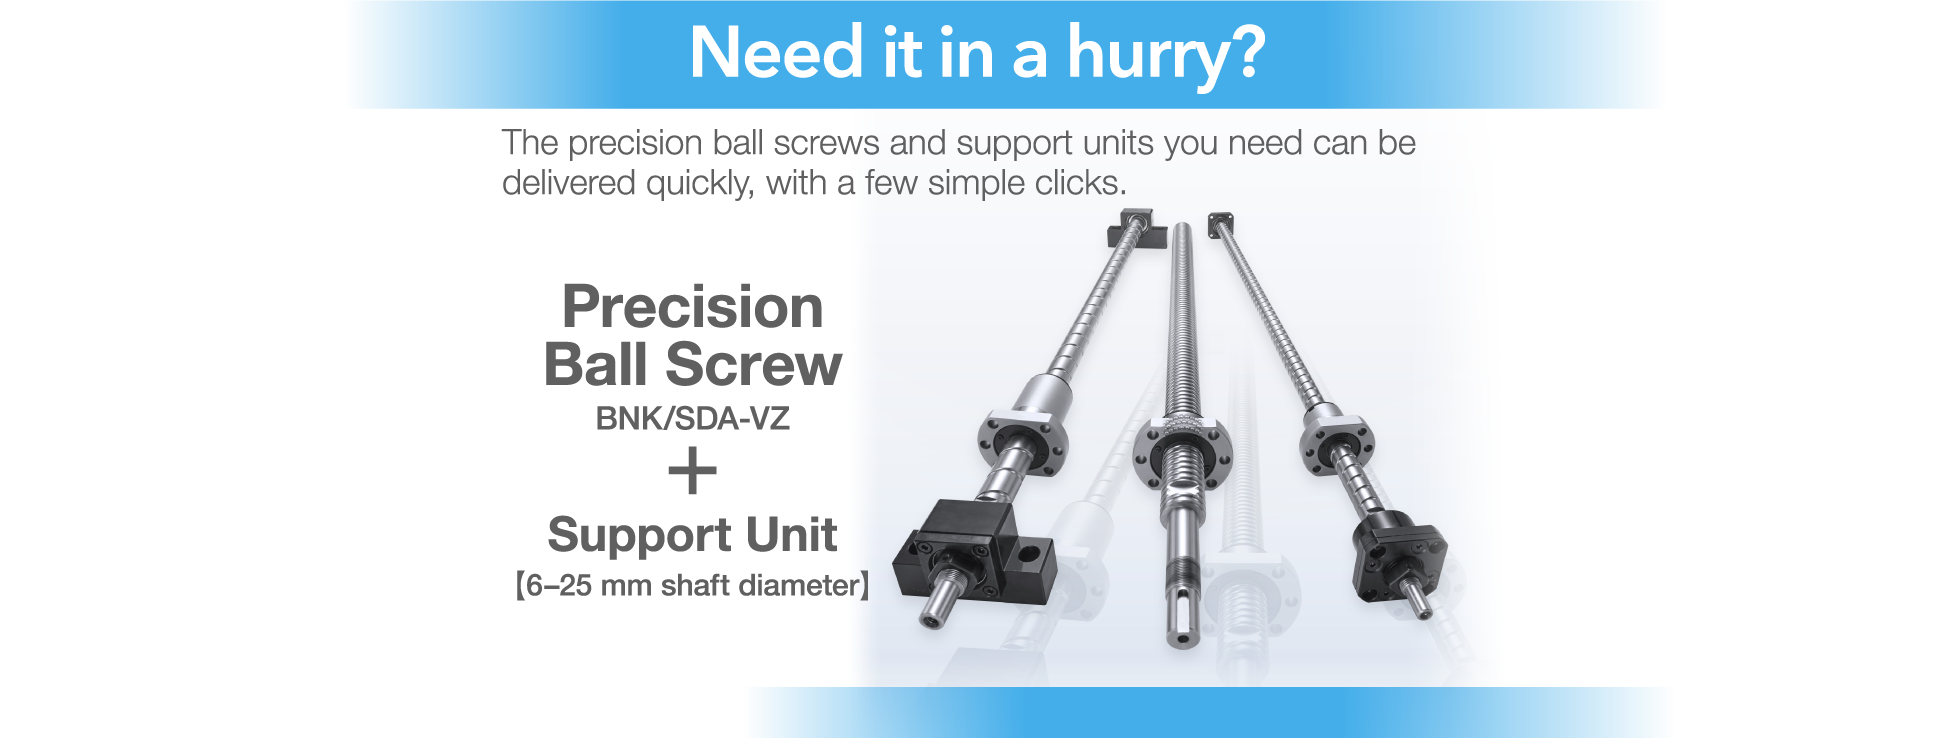 Need it in a hurry? The precision ball screws and support units you need can be delivered quickly, with a few simple clicks. Precision Ball Screw + Support Unit 【6-25 mm shaft diameter】